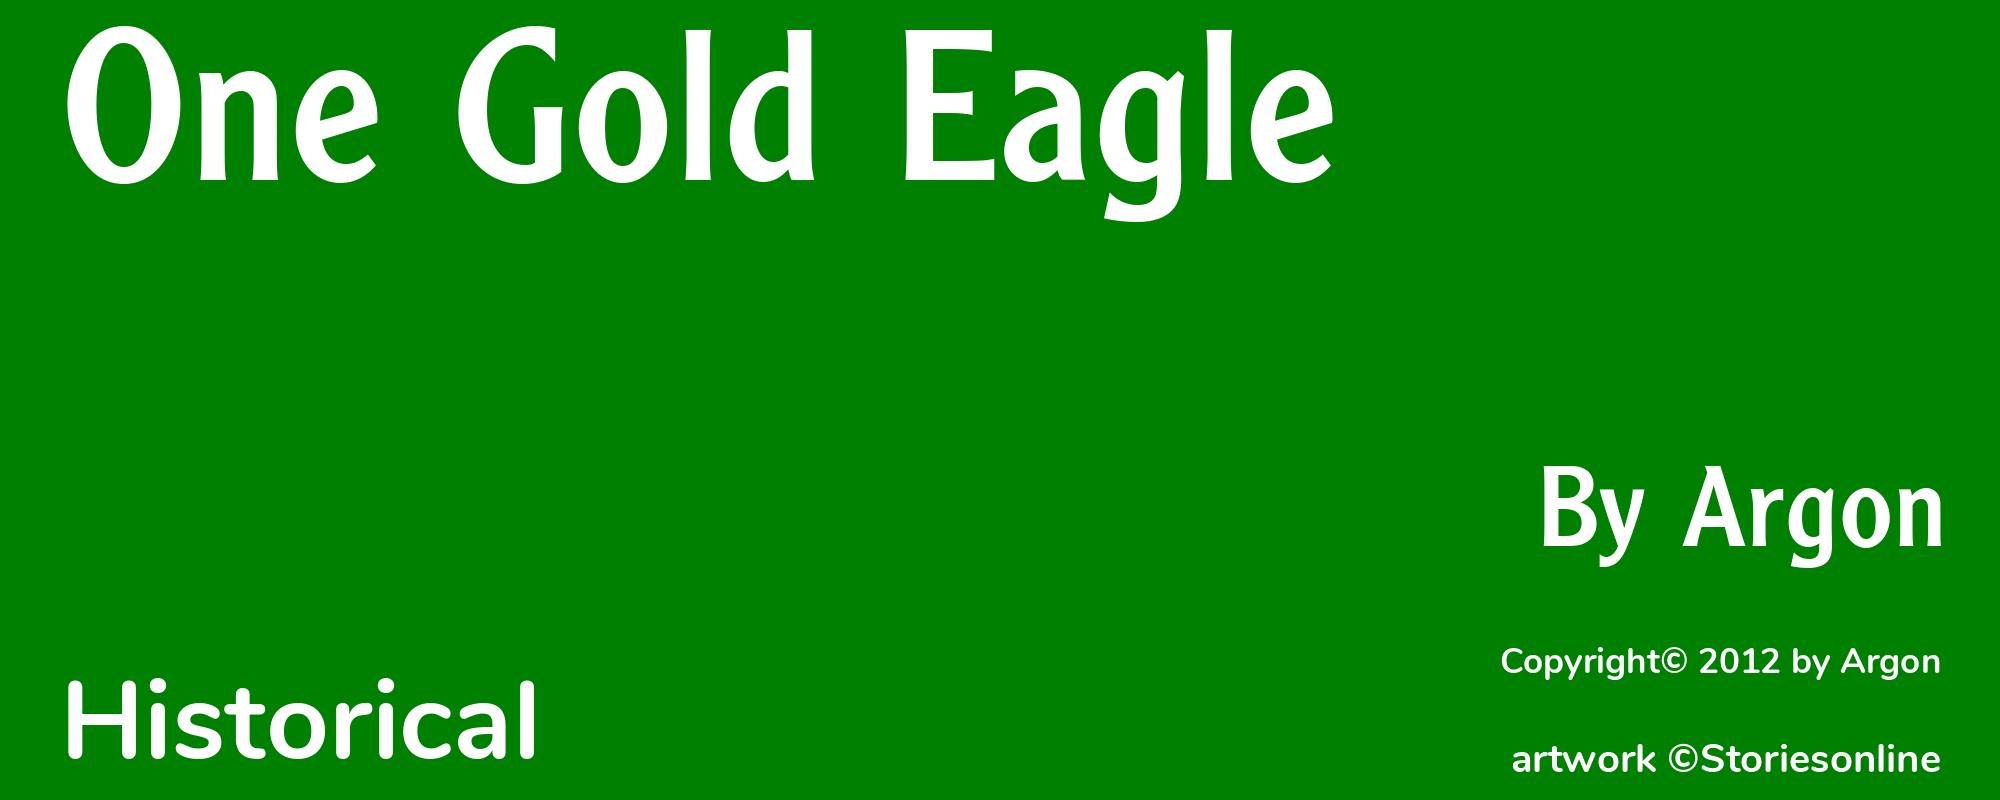 One Gold Eagle - Cover